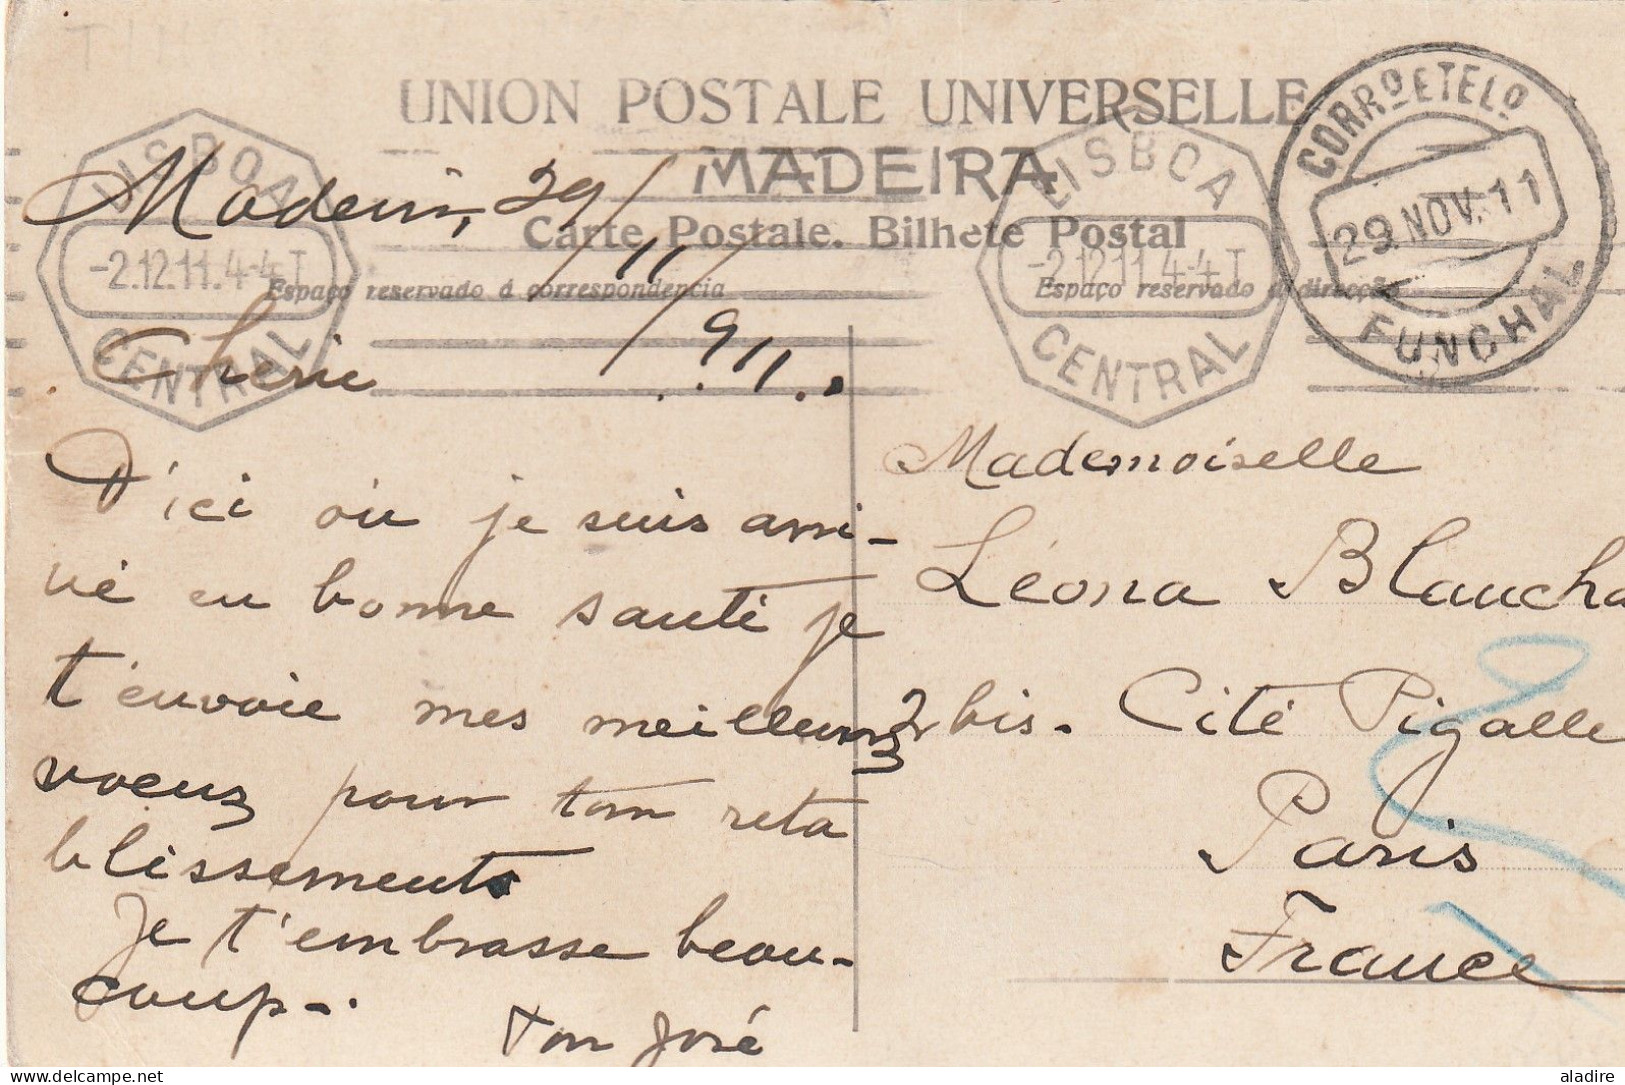 PORTUGAL - Collection of 13 old letters, covers &  card (1799 -1964) - 26 scans - € 49 euros